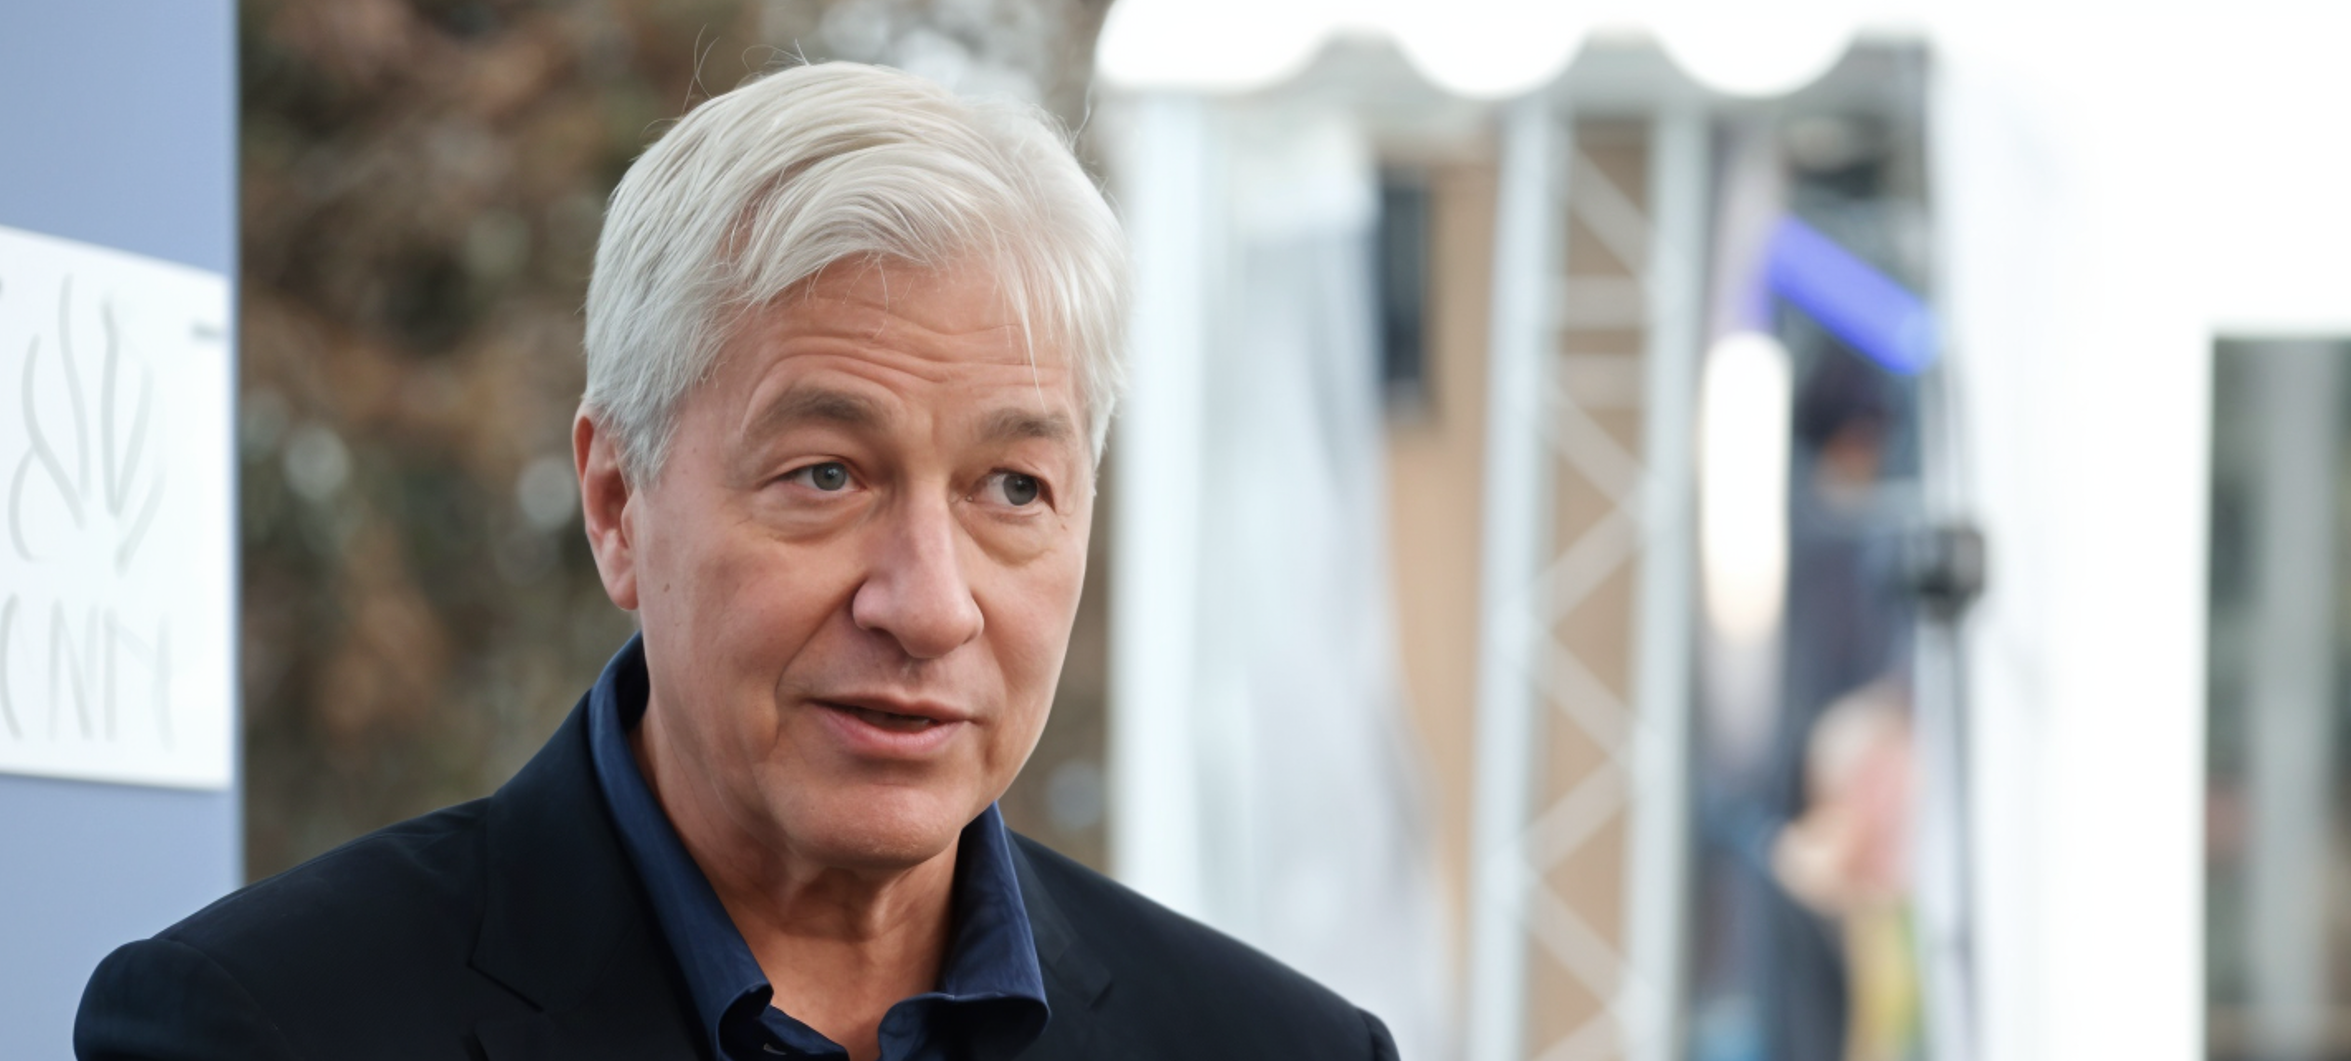 JPMorgan's Jamie Dimon cautions that inflation and interest rates may remain higher